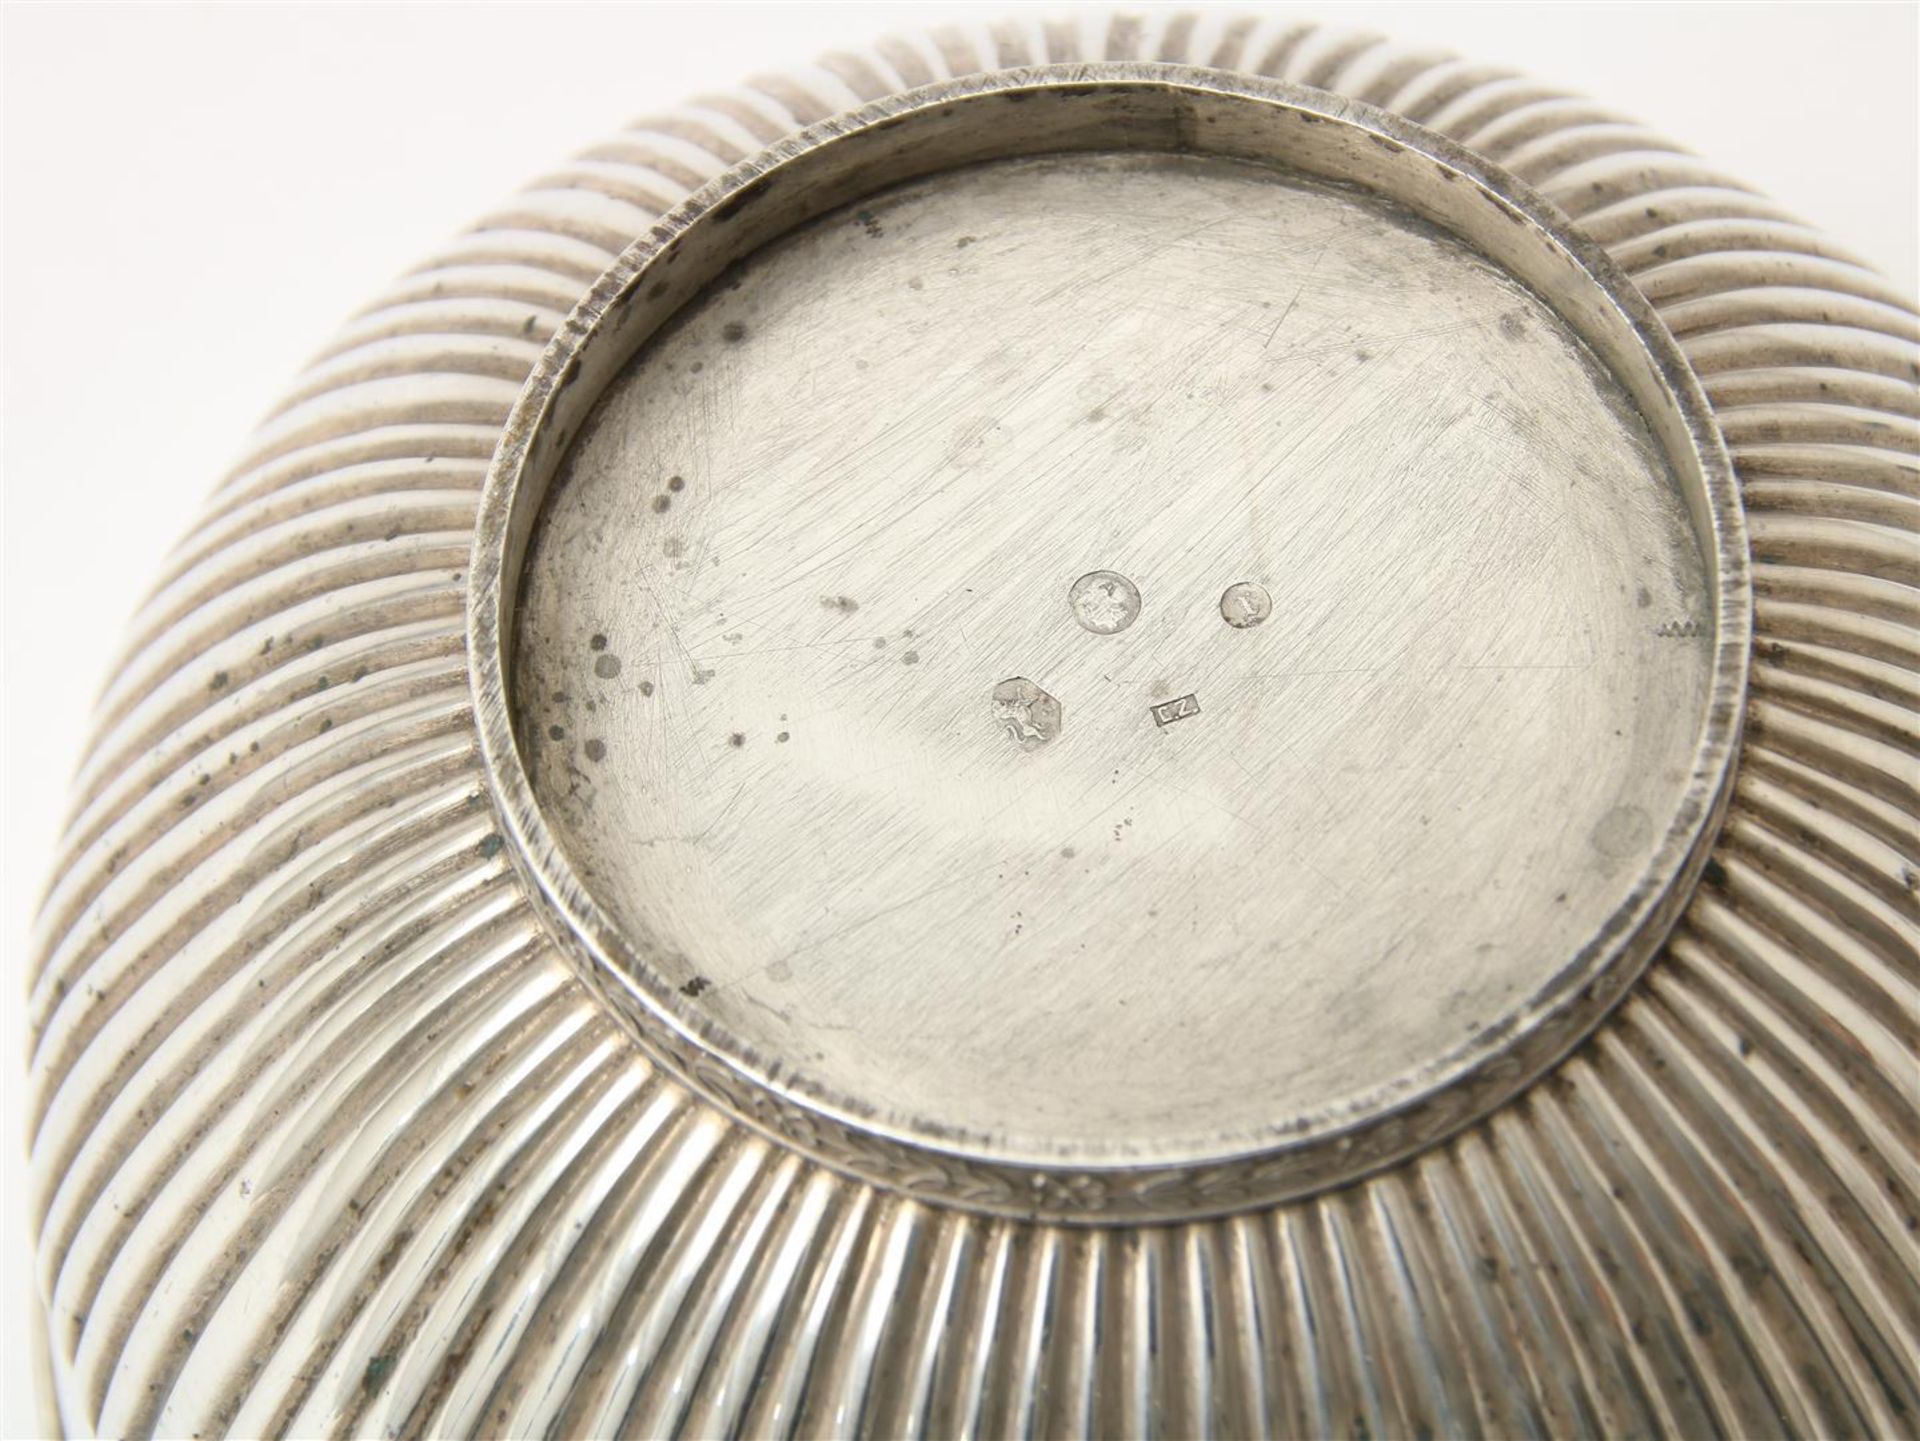 Silver bowl, last 1868, size. Gerritsen J.A.A. Amsterdam, gross weight 176 grams - Image 2 of 2